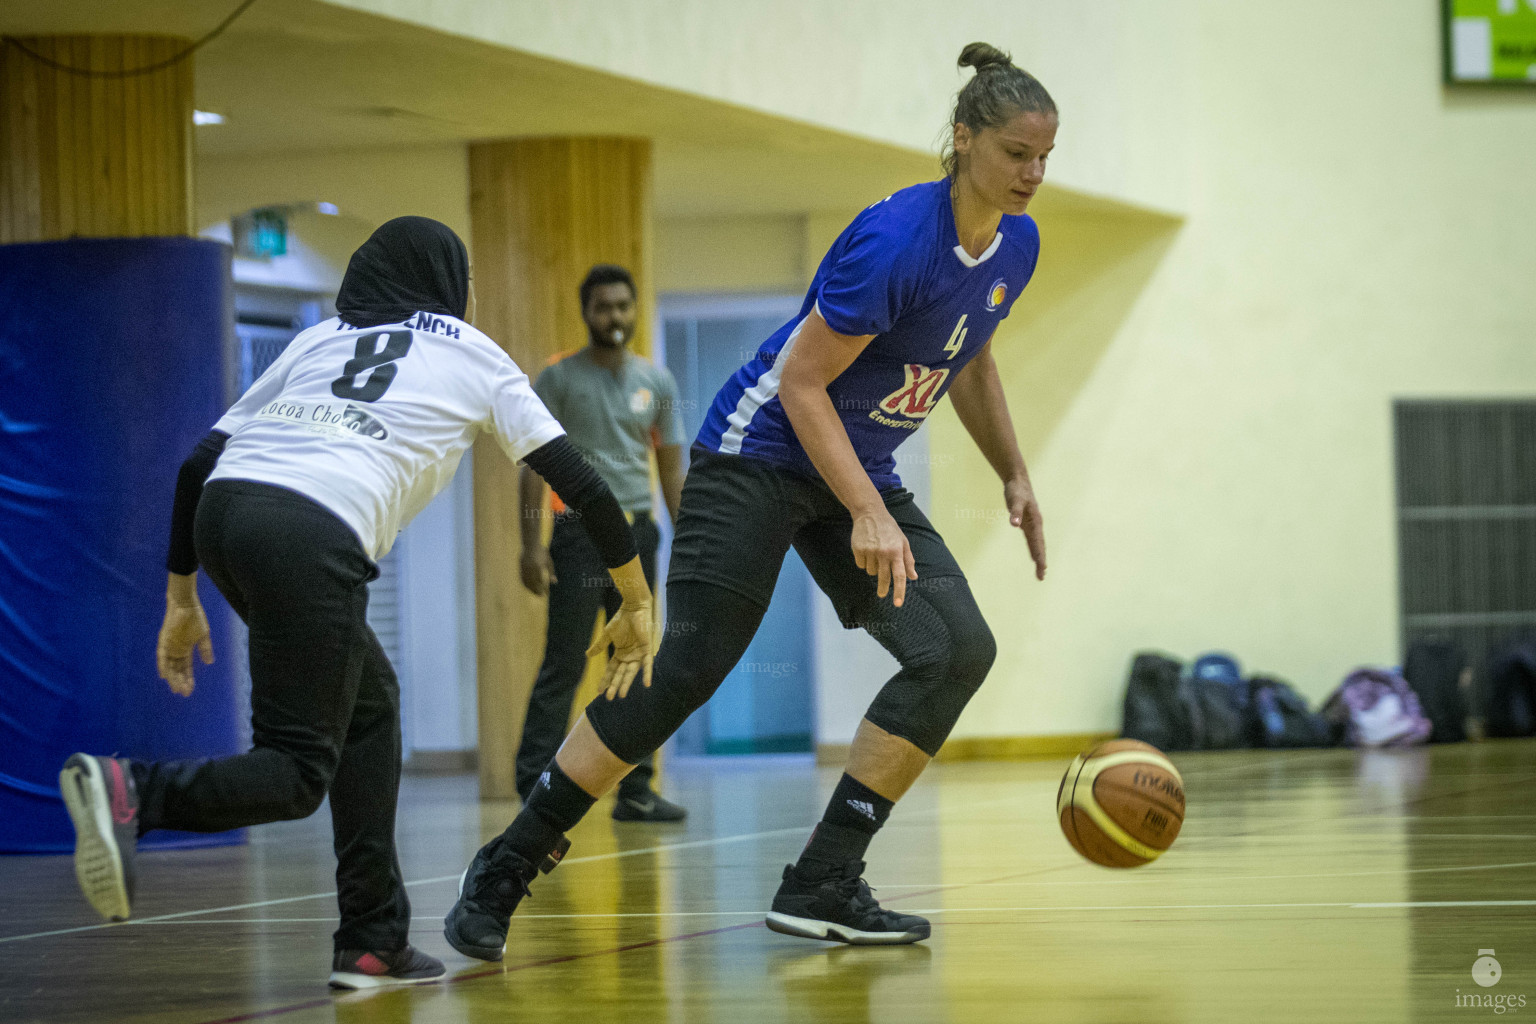 Cyclone BS vs The Bench in 13th National Basketball League 2018 (Women's Division), 10th December 2018, Monday Photos: Suadh Abdul Sattar / images.mv